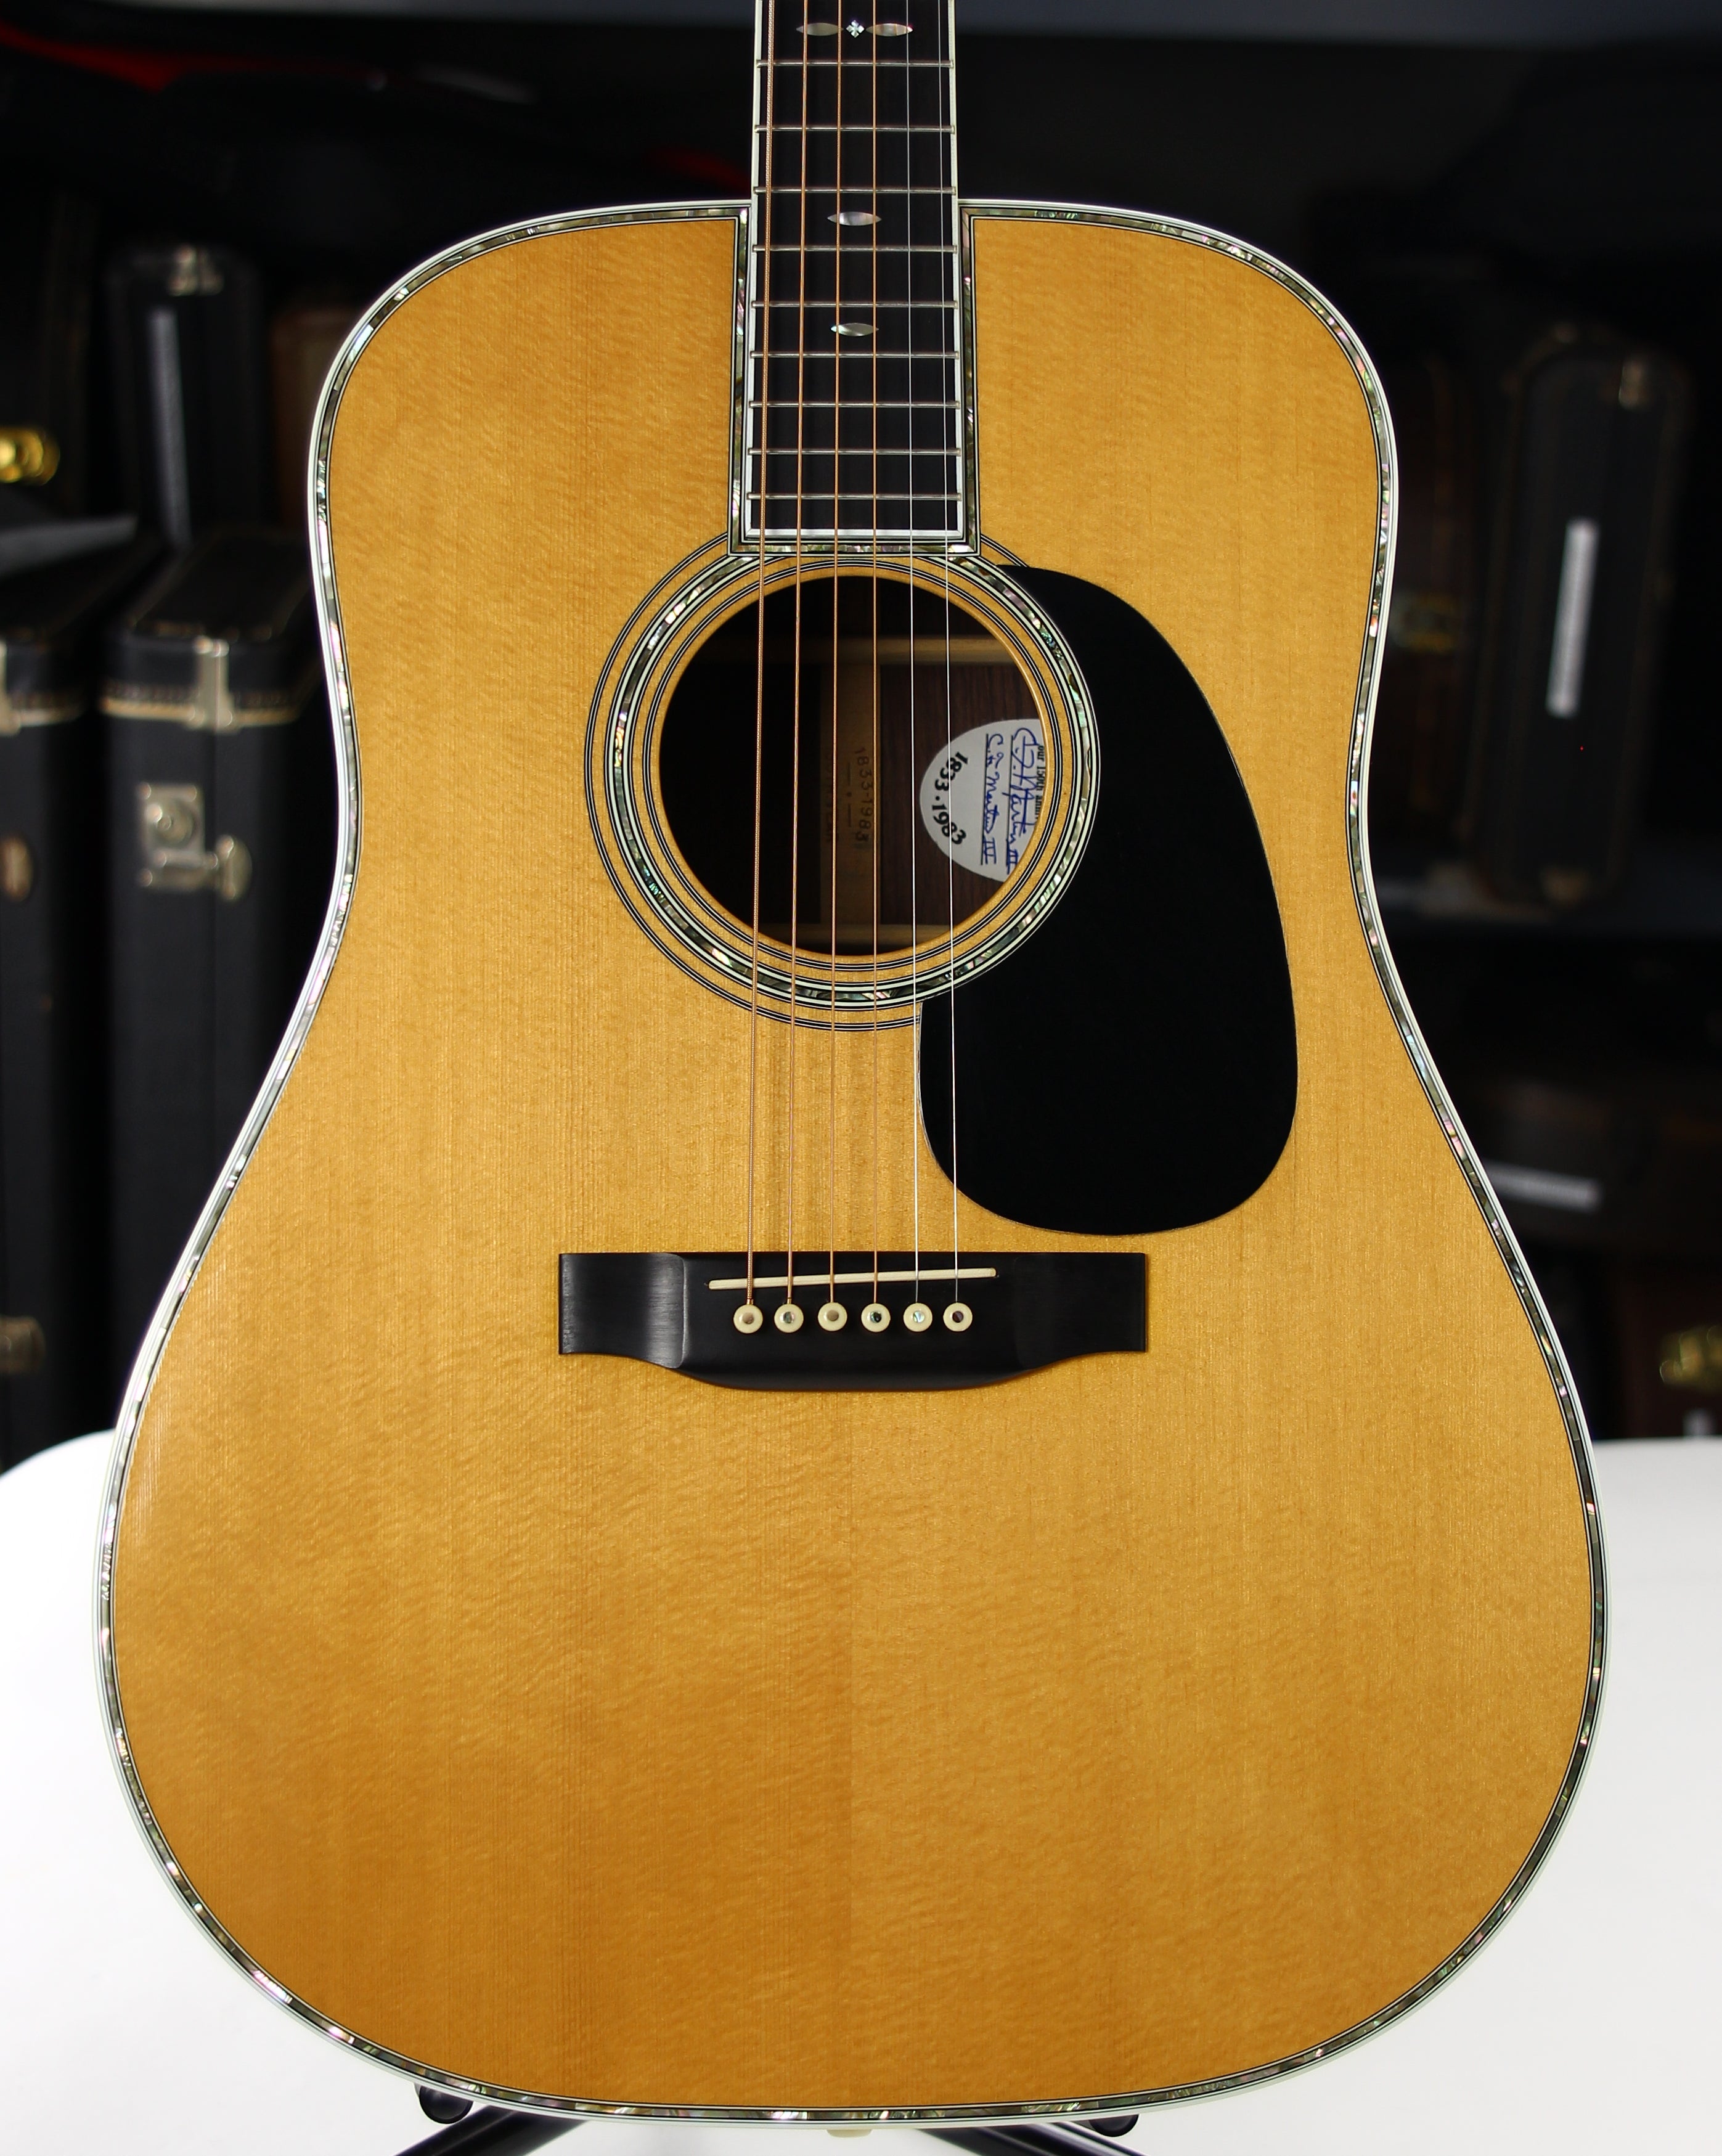 1983 Martin D-45 Custom 150th Anniversary Slot Headstock, 14-Fret, Limited Edition VINTAGE CANNON!